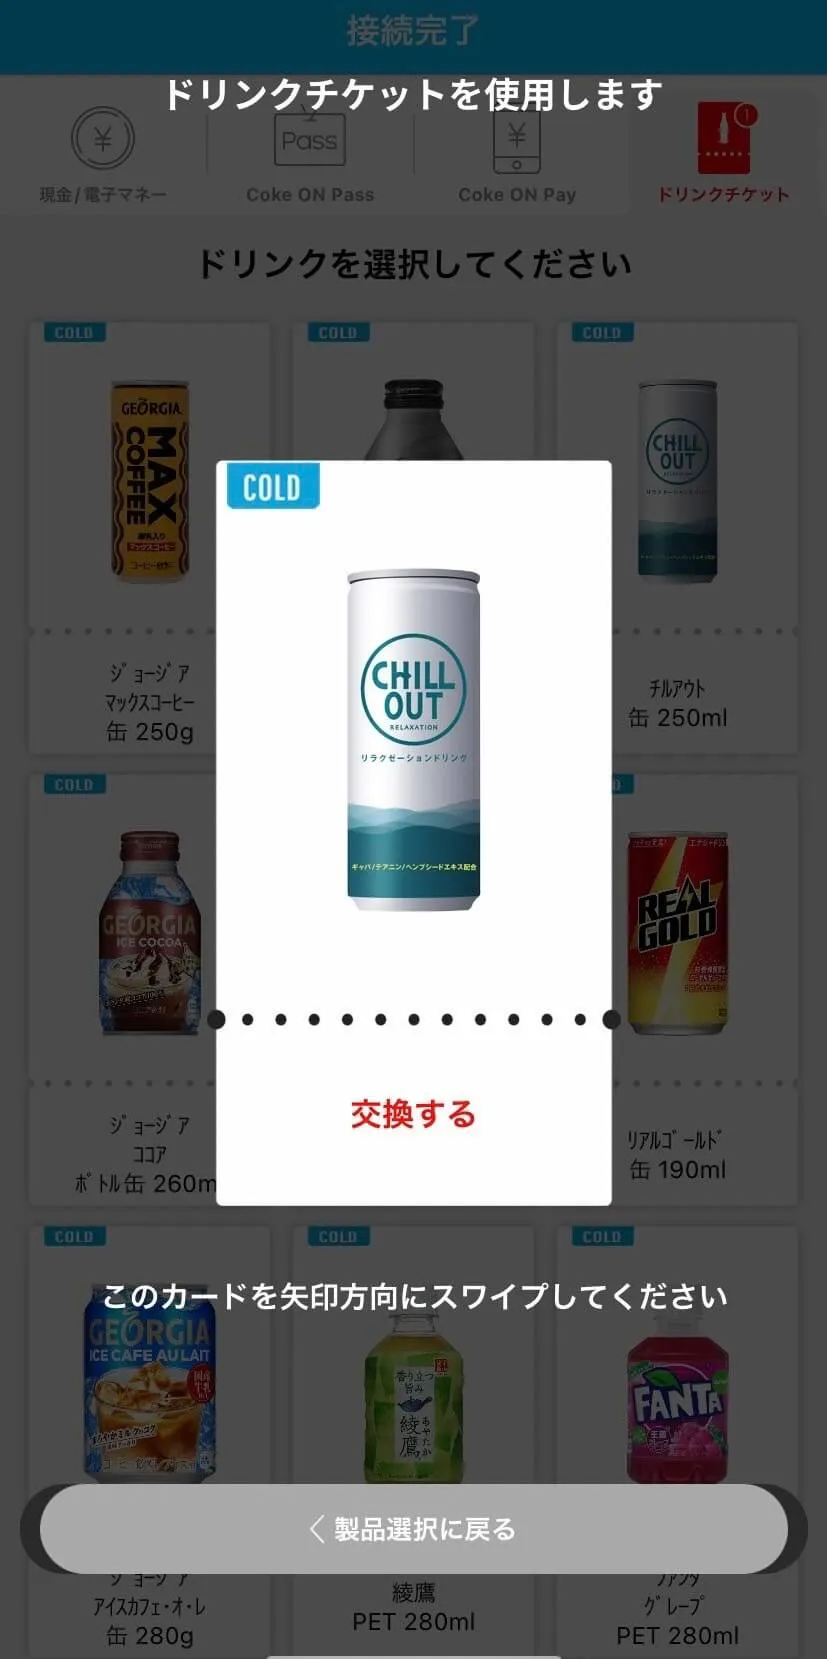 Chill out ドリンクチケット